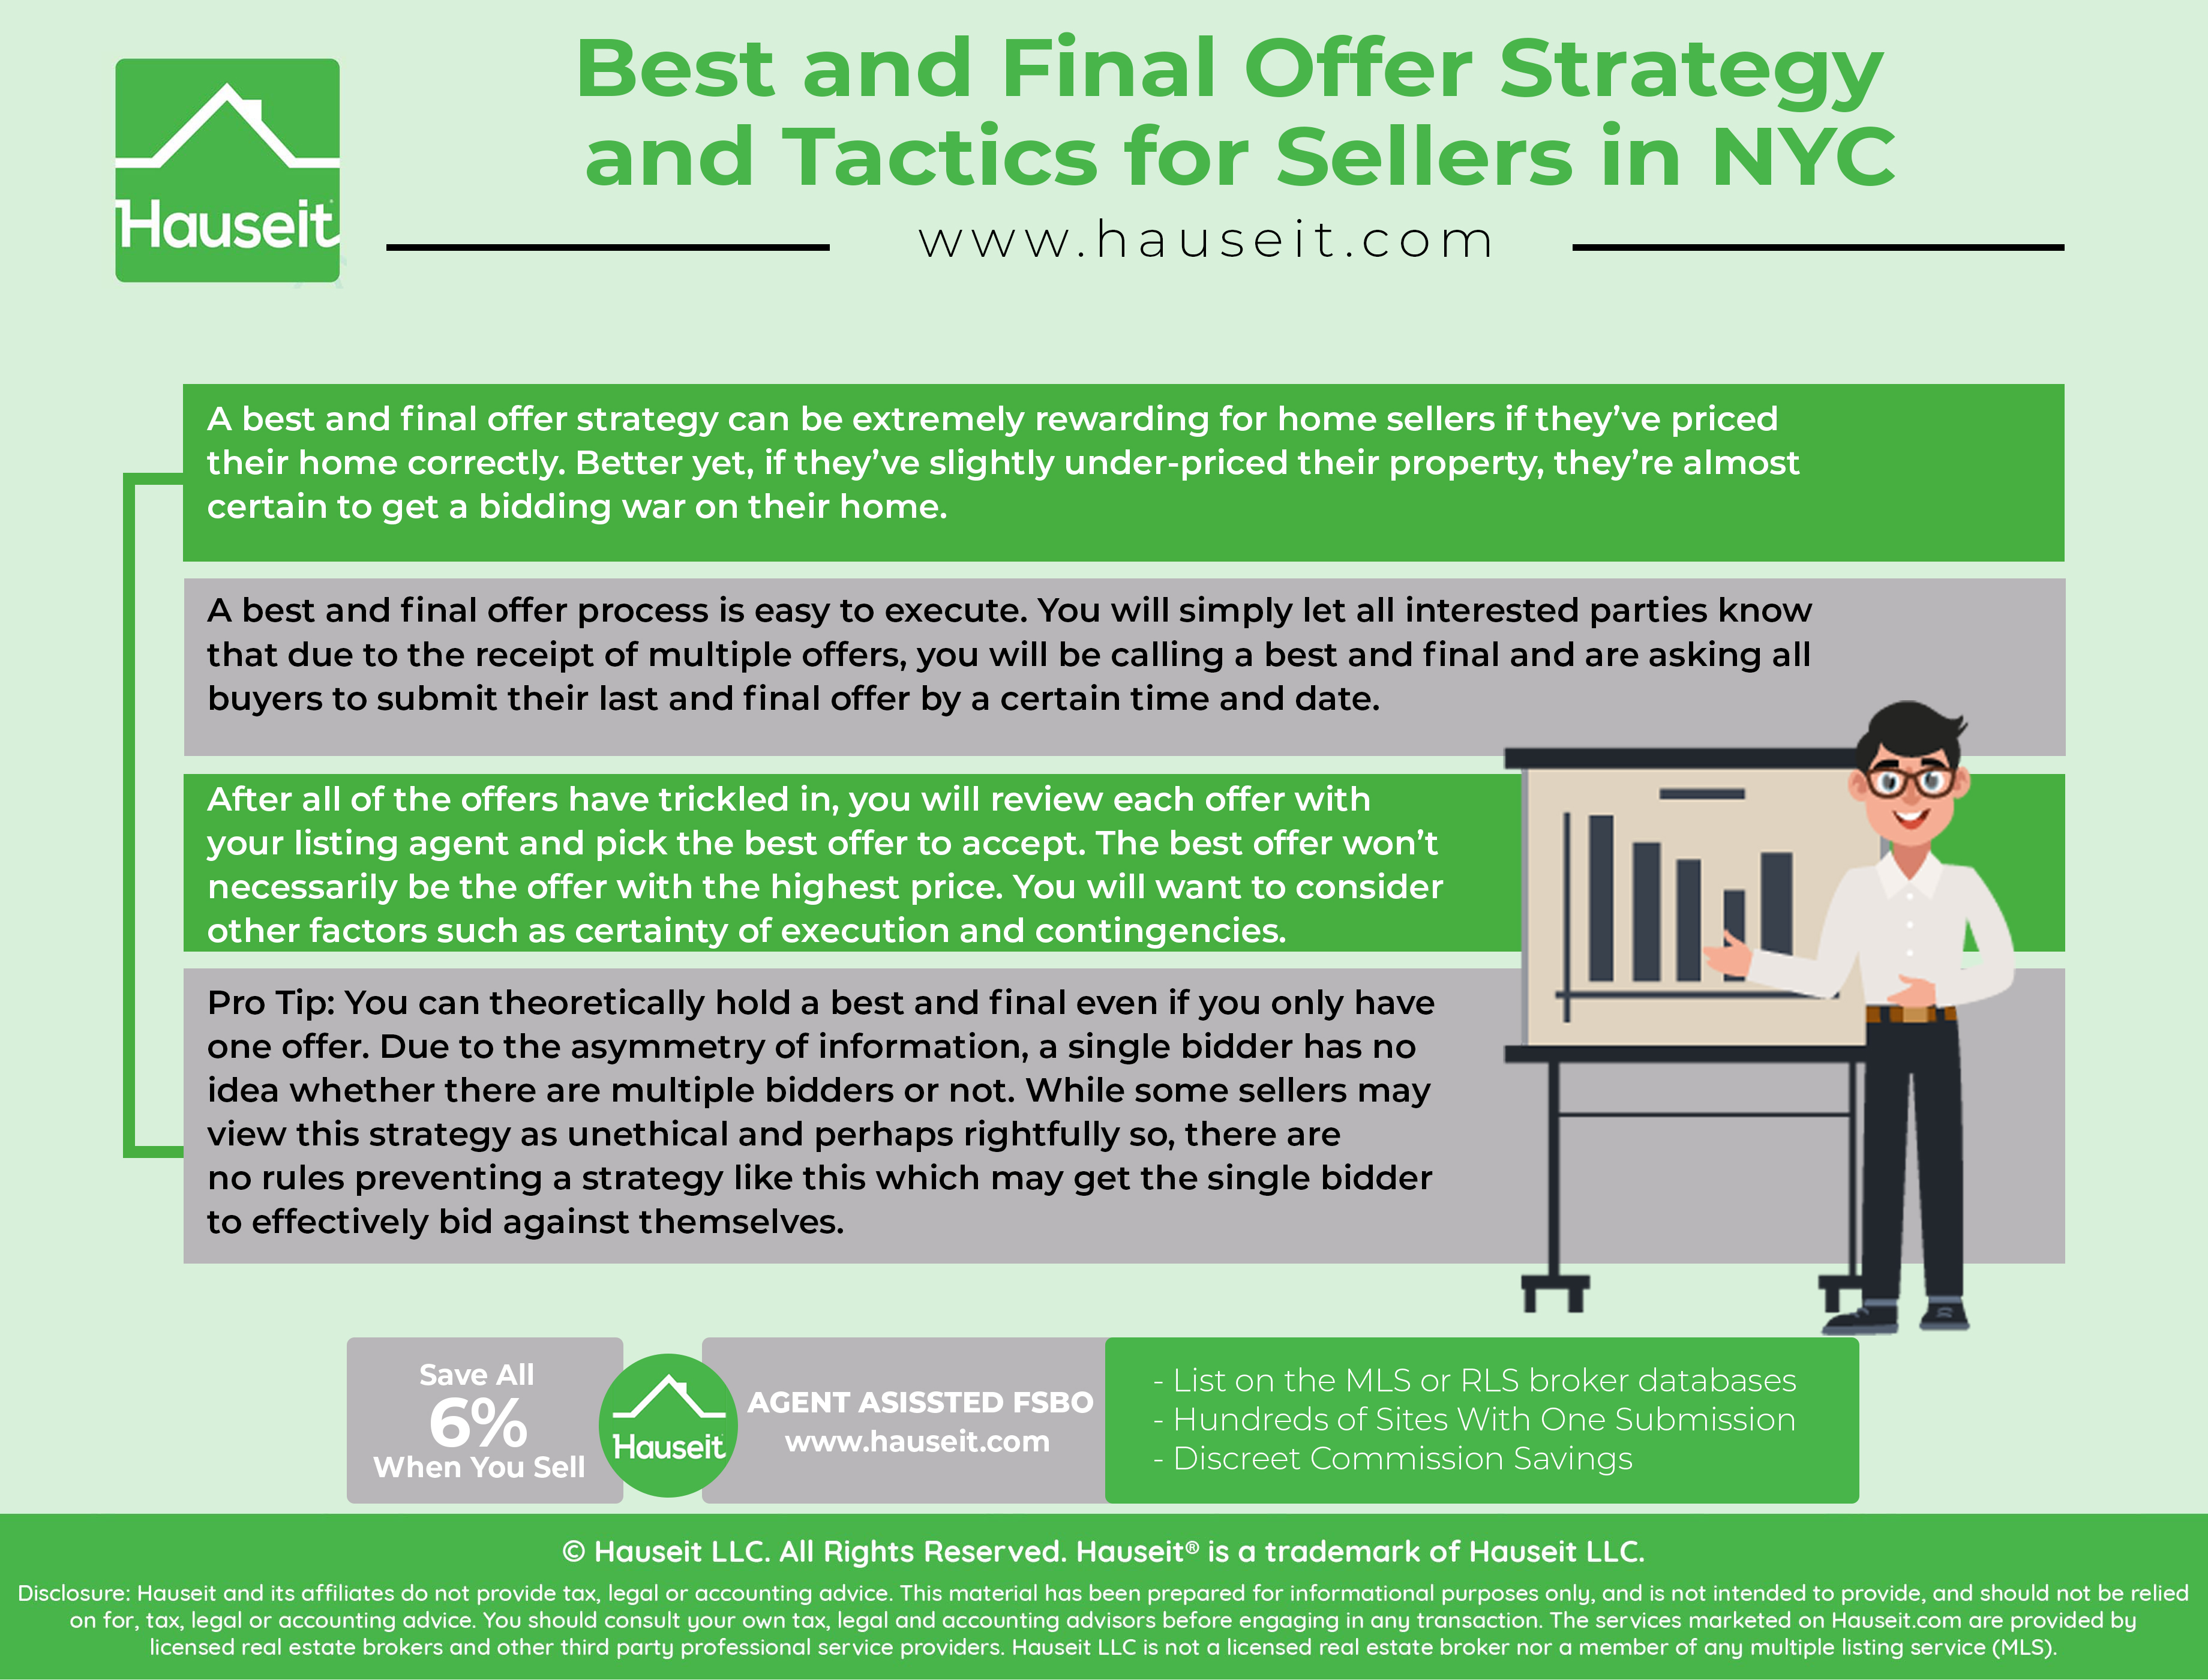 A best and final offer strategy can be extremely rewarding for home sellers if they’ve priced their home correctly. Better yet, if they’ve slightly under-priced their property, they’re almost certain to get a bidding war on their home.